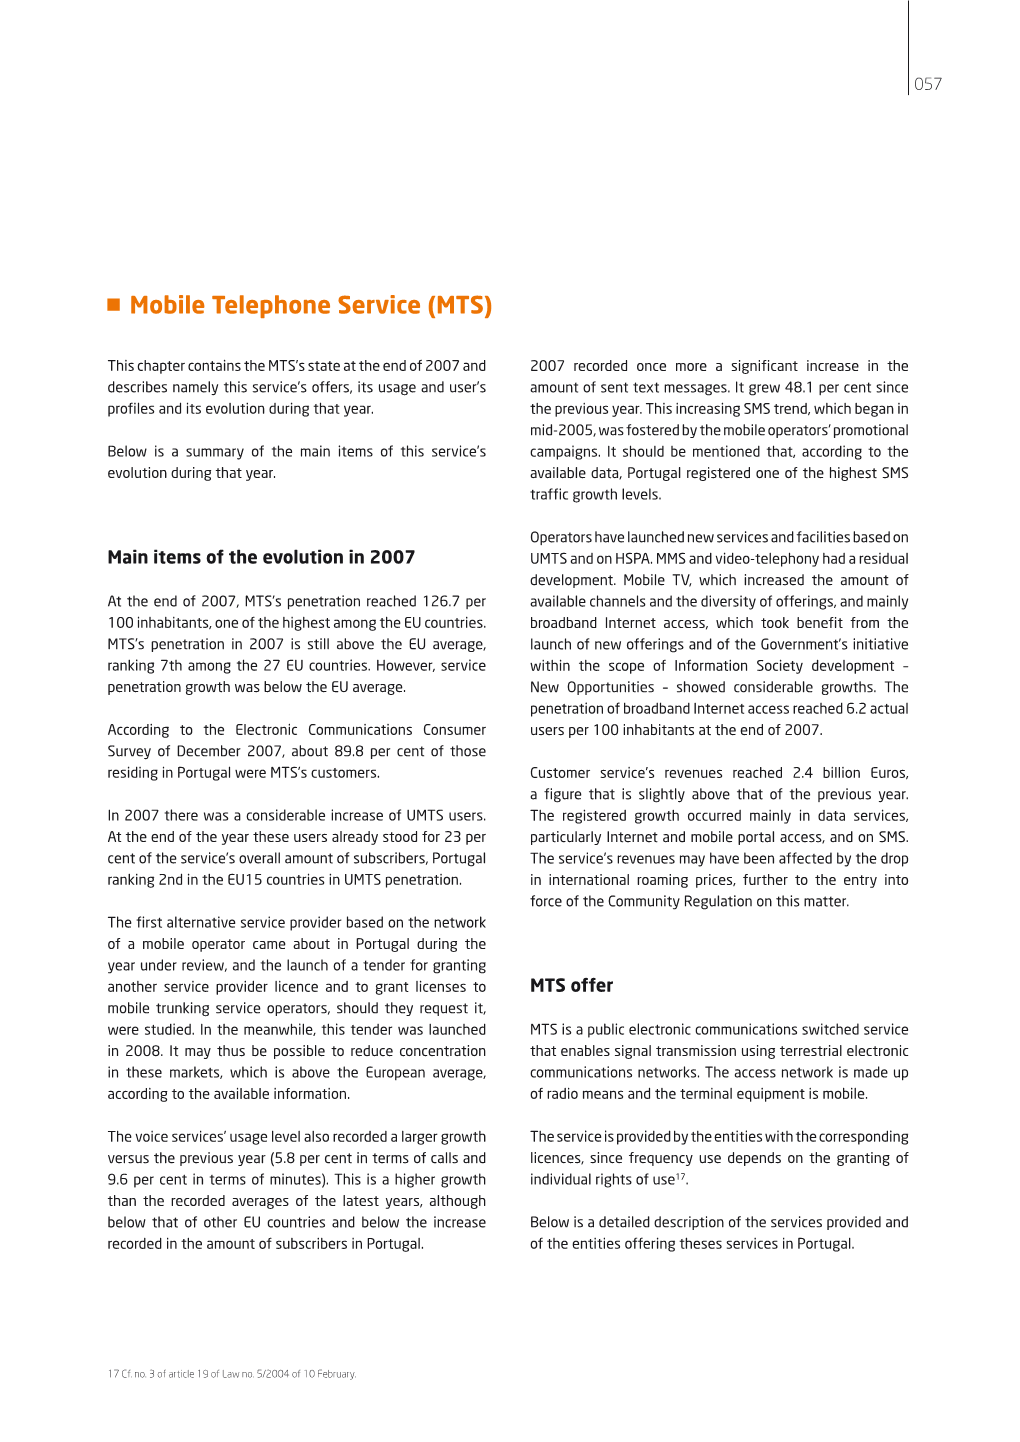 Mobile Telephone Service (MTS)